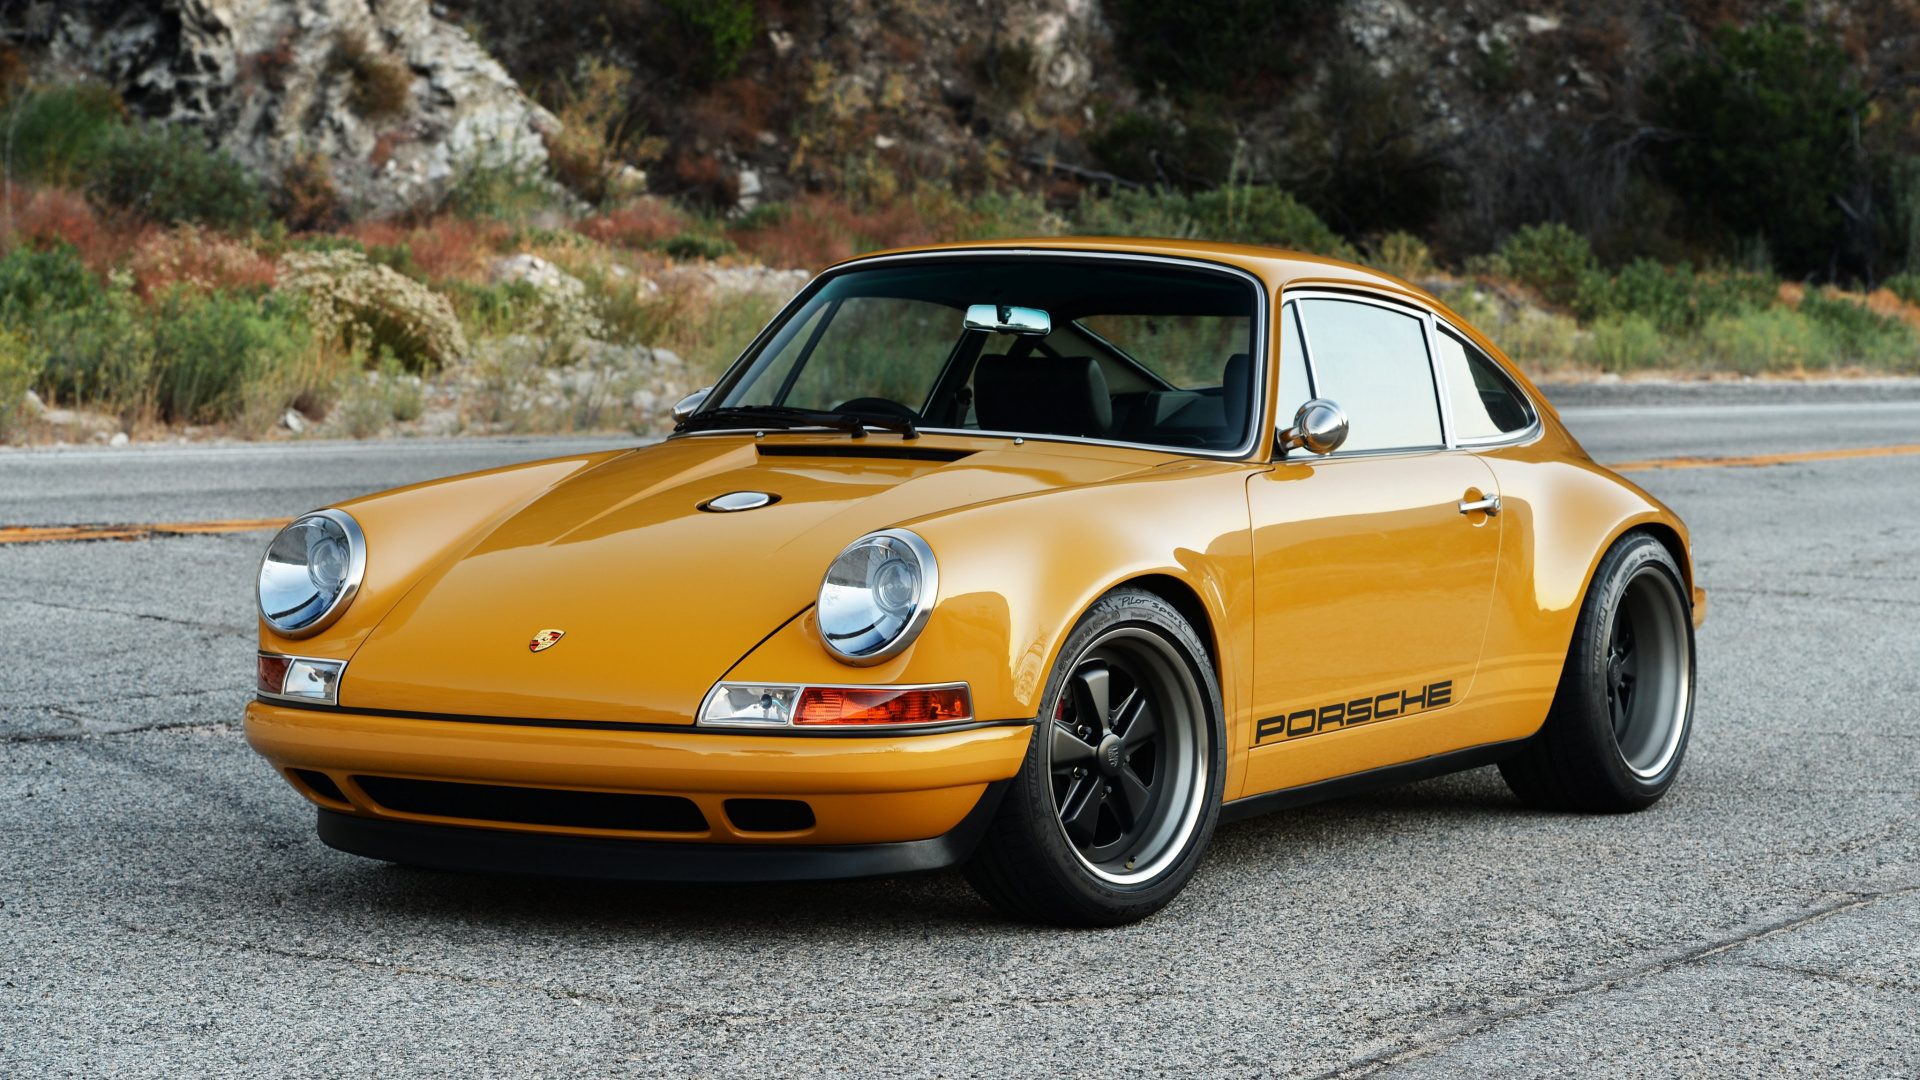 Yellow Porsche 911 on Road During Daytime. Wallpaper in 1920x1080 Resolution